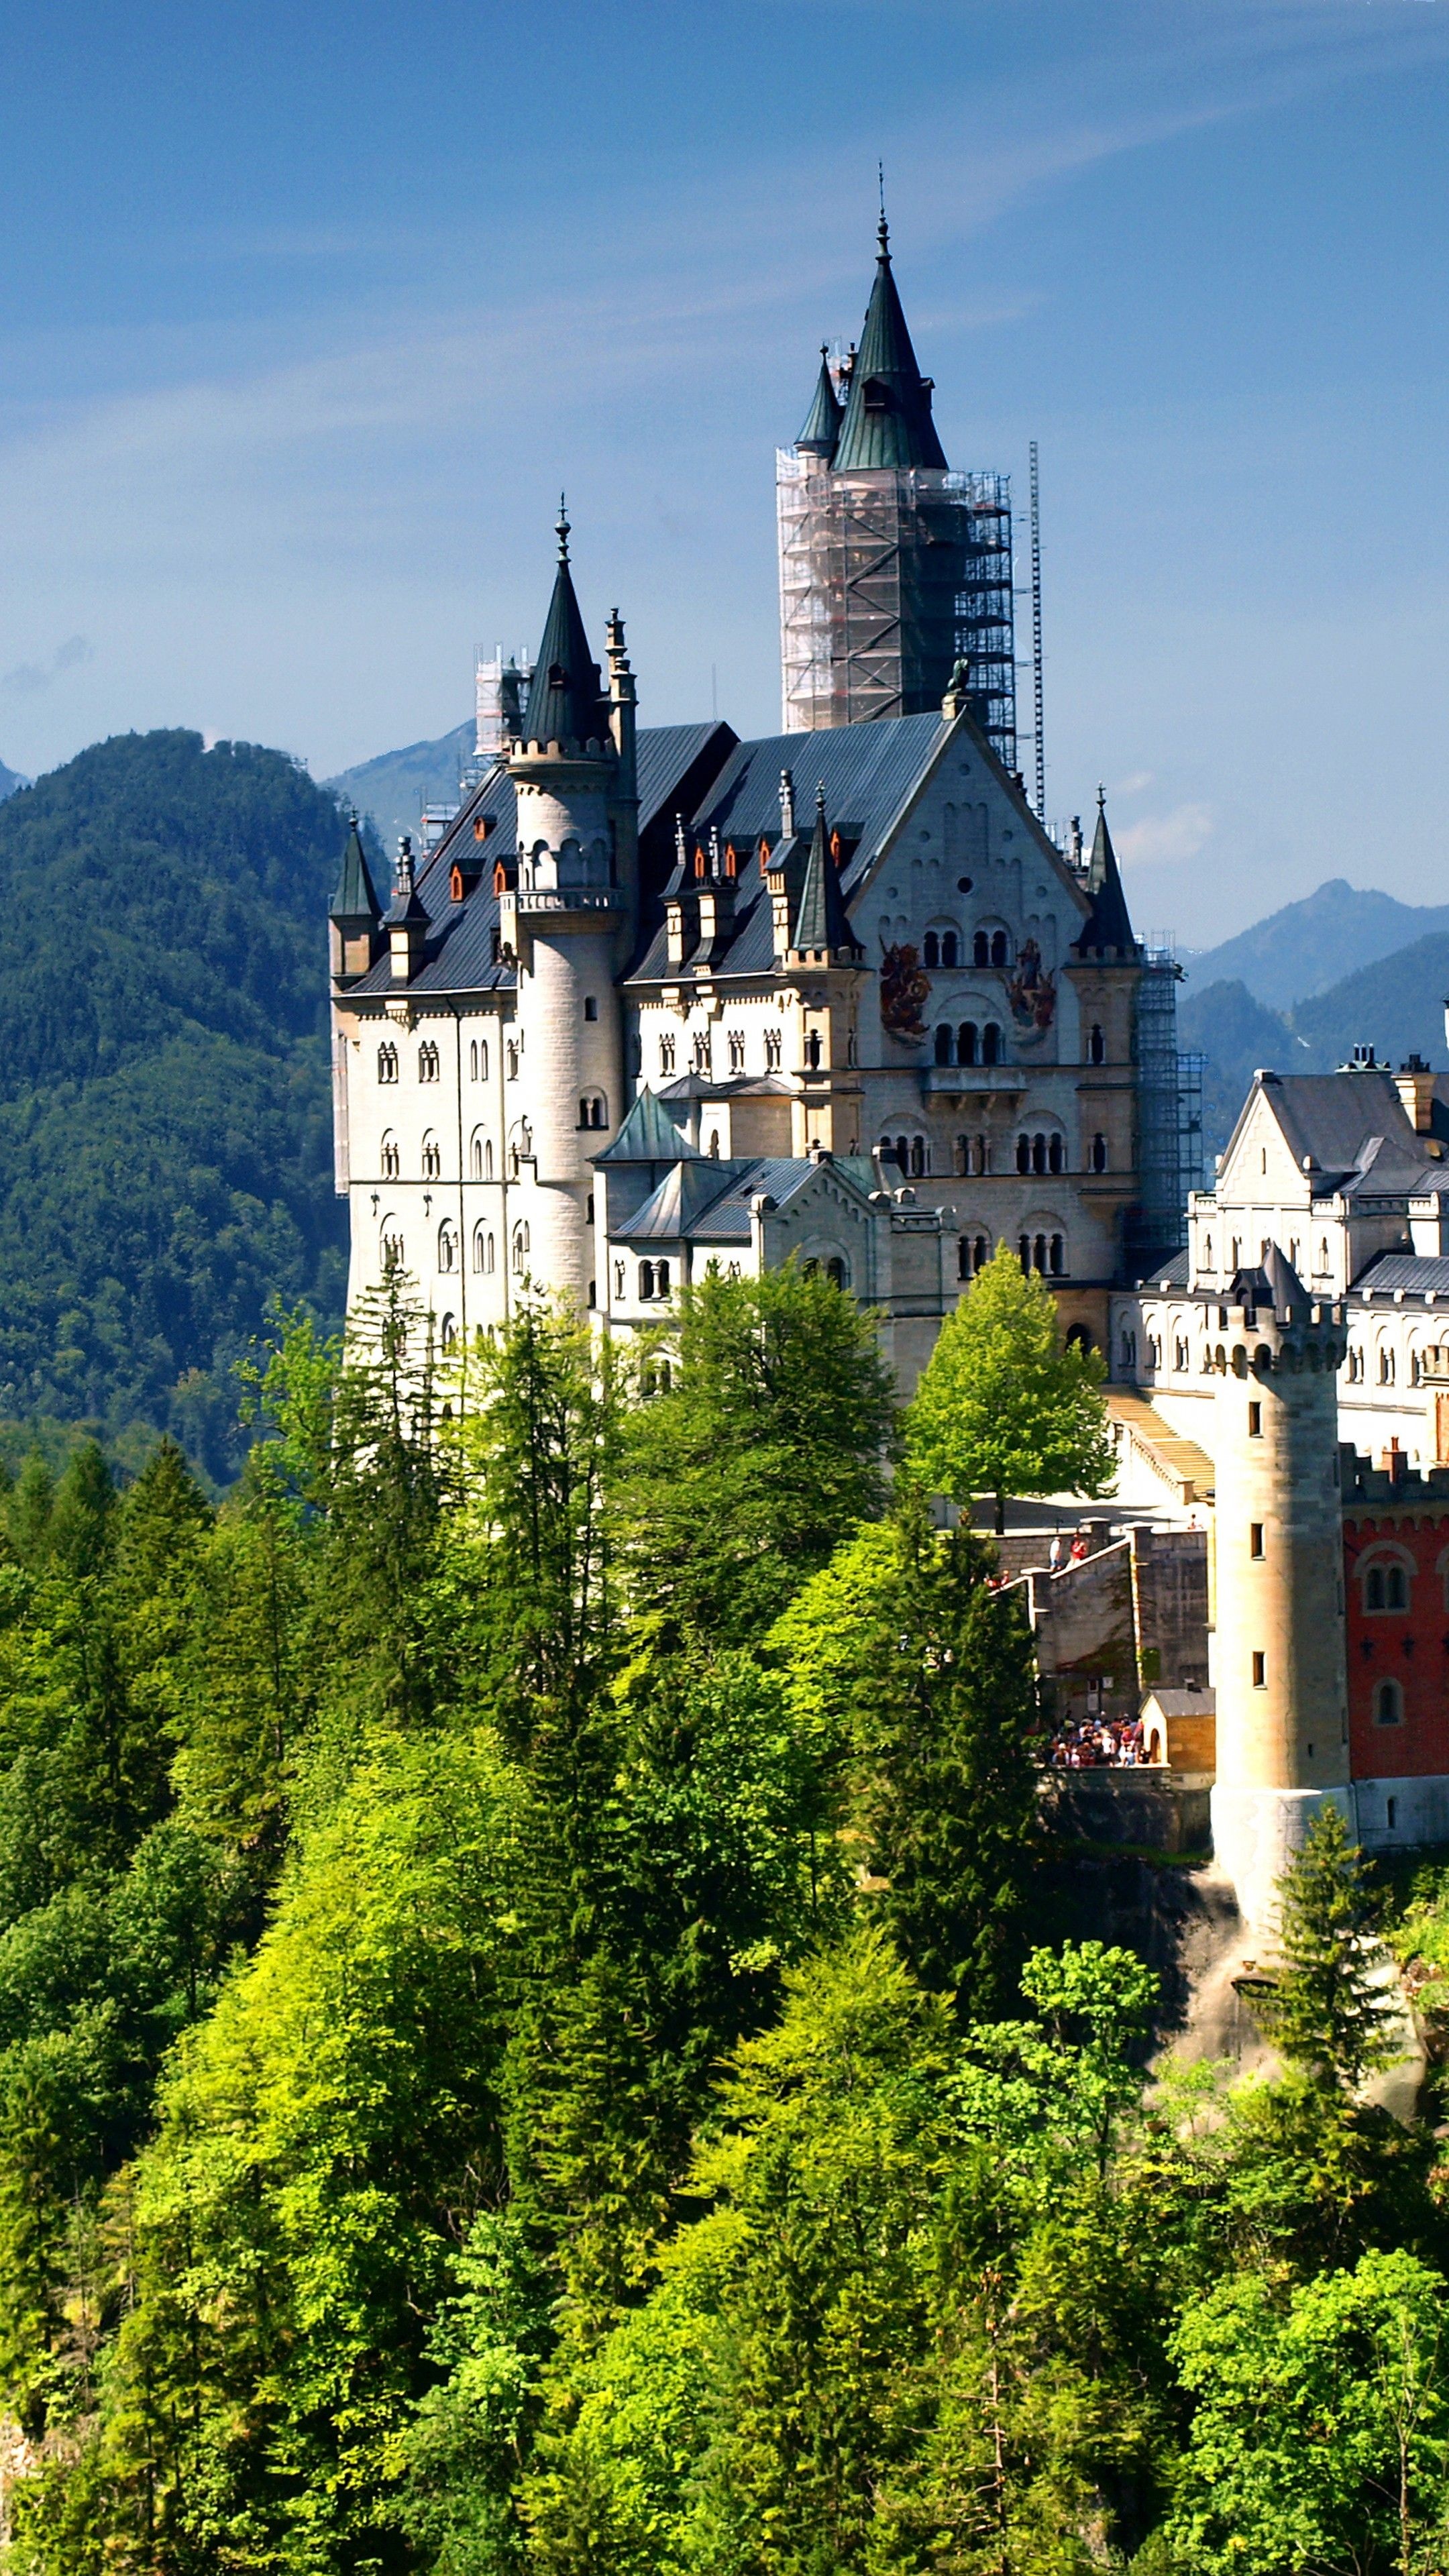 Castle: The private fortified residence of King Ludwig II of Bavaria. 2160x3840 4K Wallpaper.